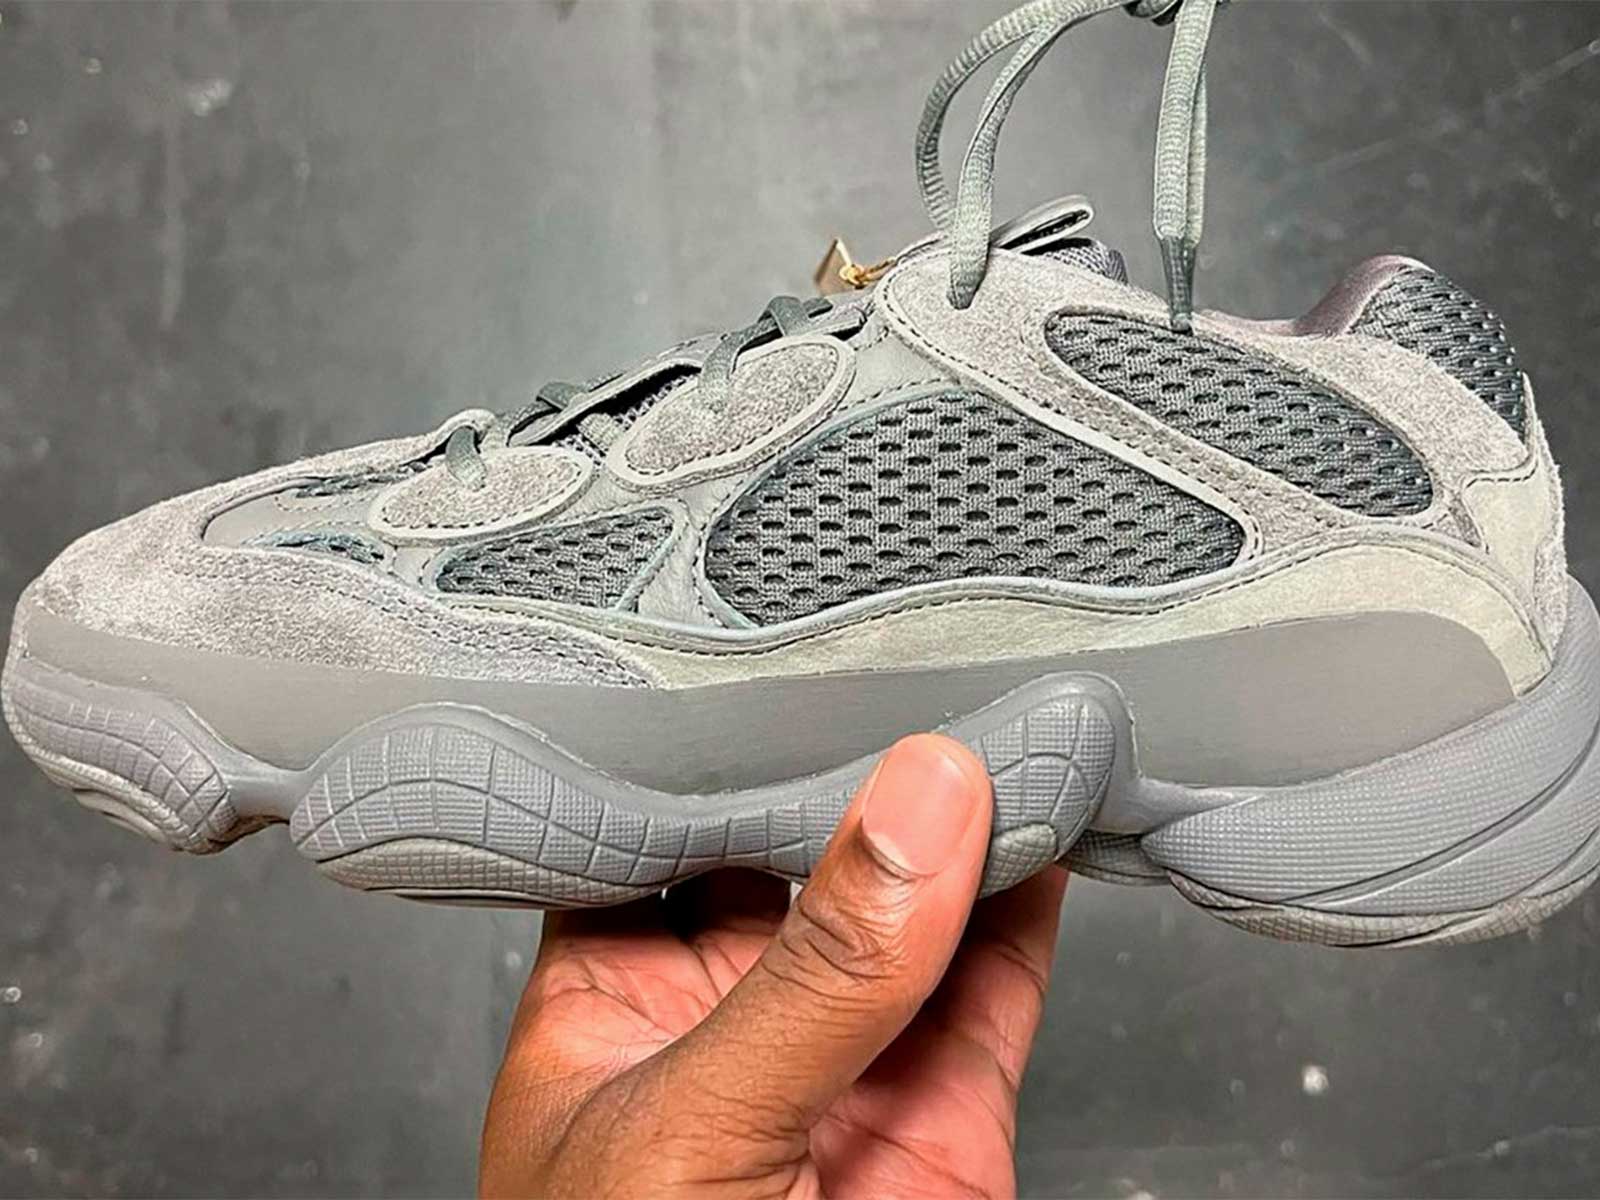 The definitive version of the YEEZY 500 arrives: 'Granite'